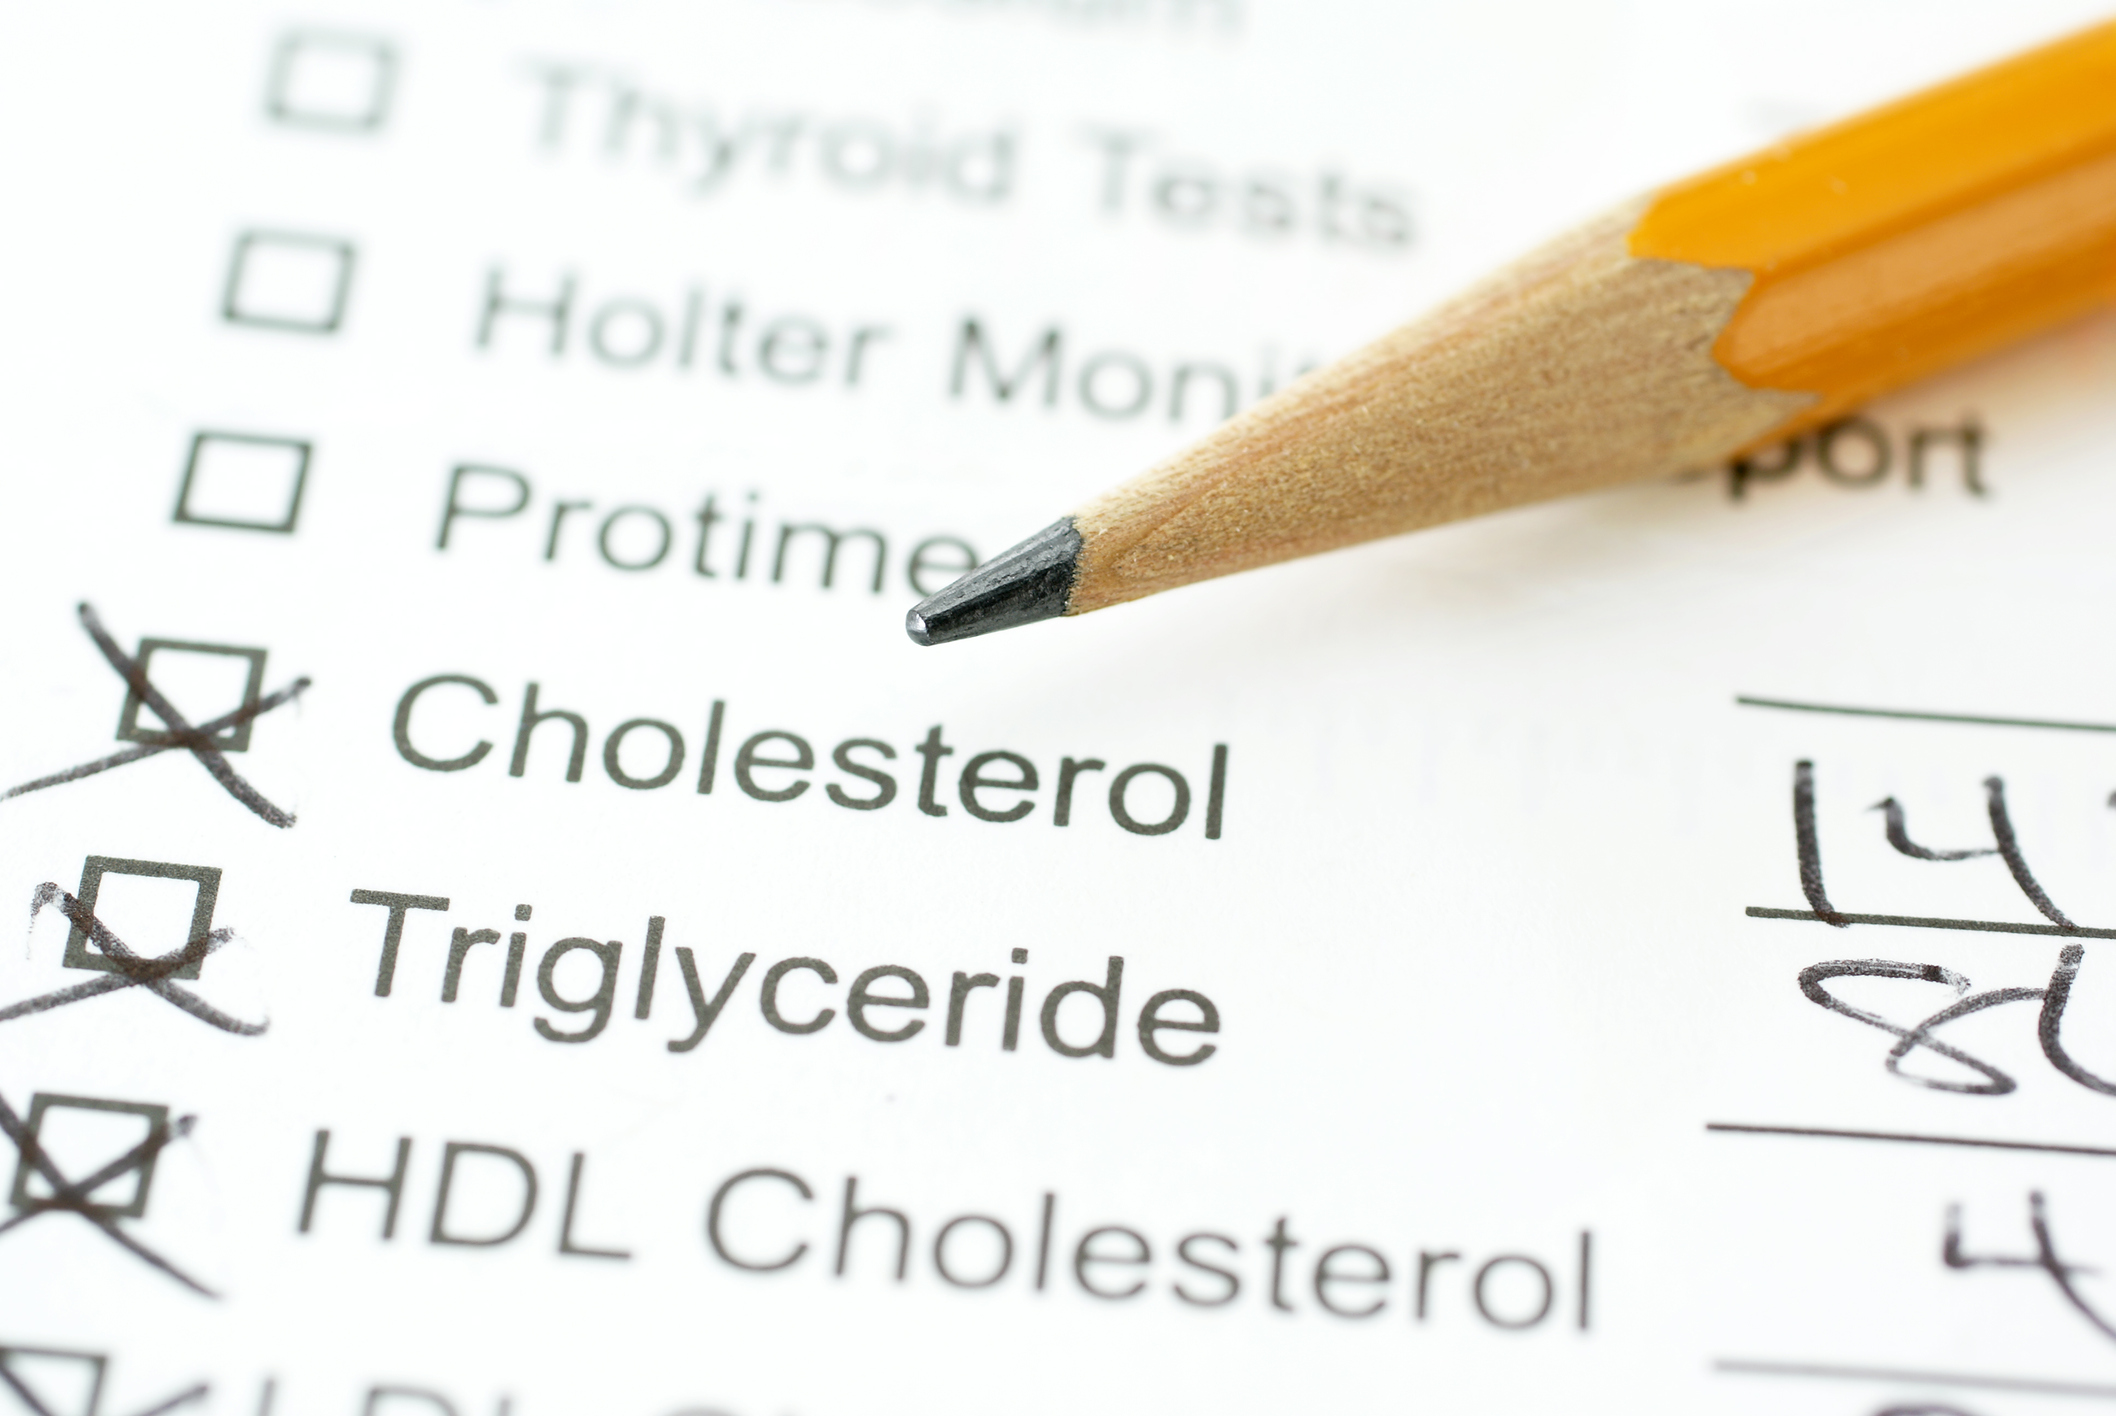 List of checkboxes, cholesterol is checked